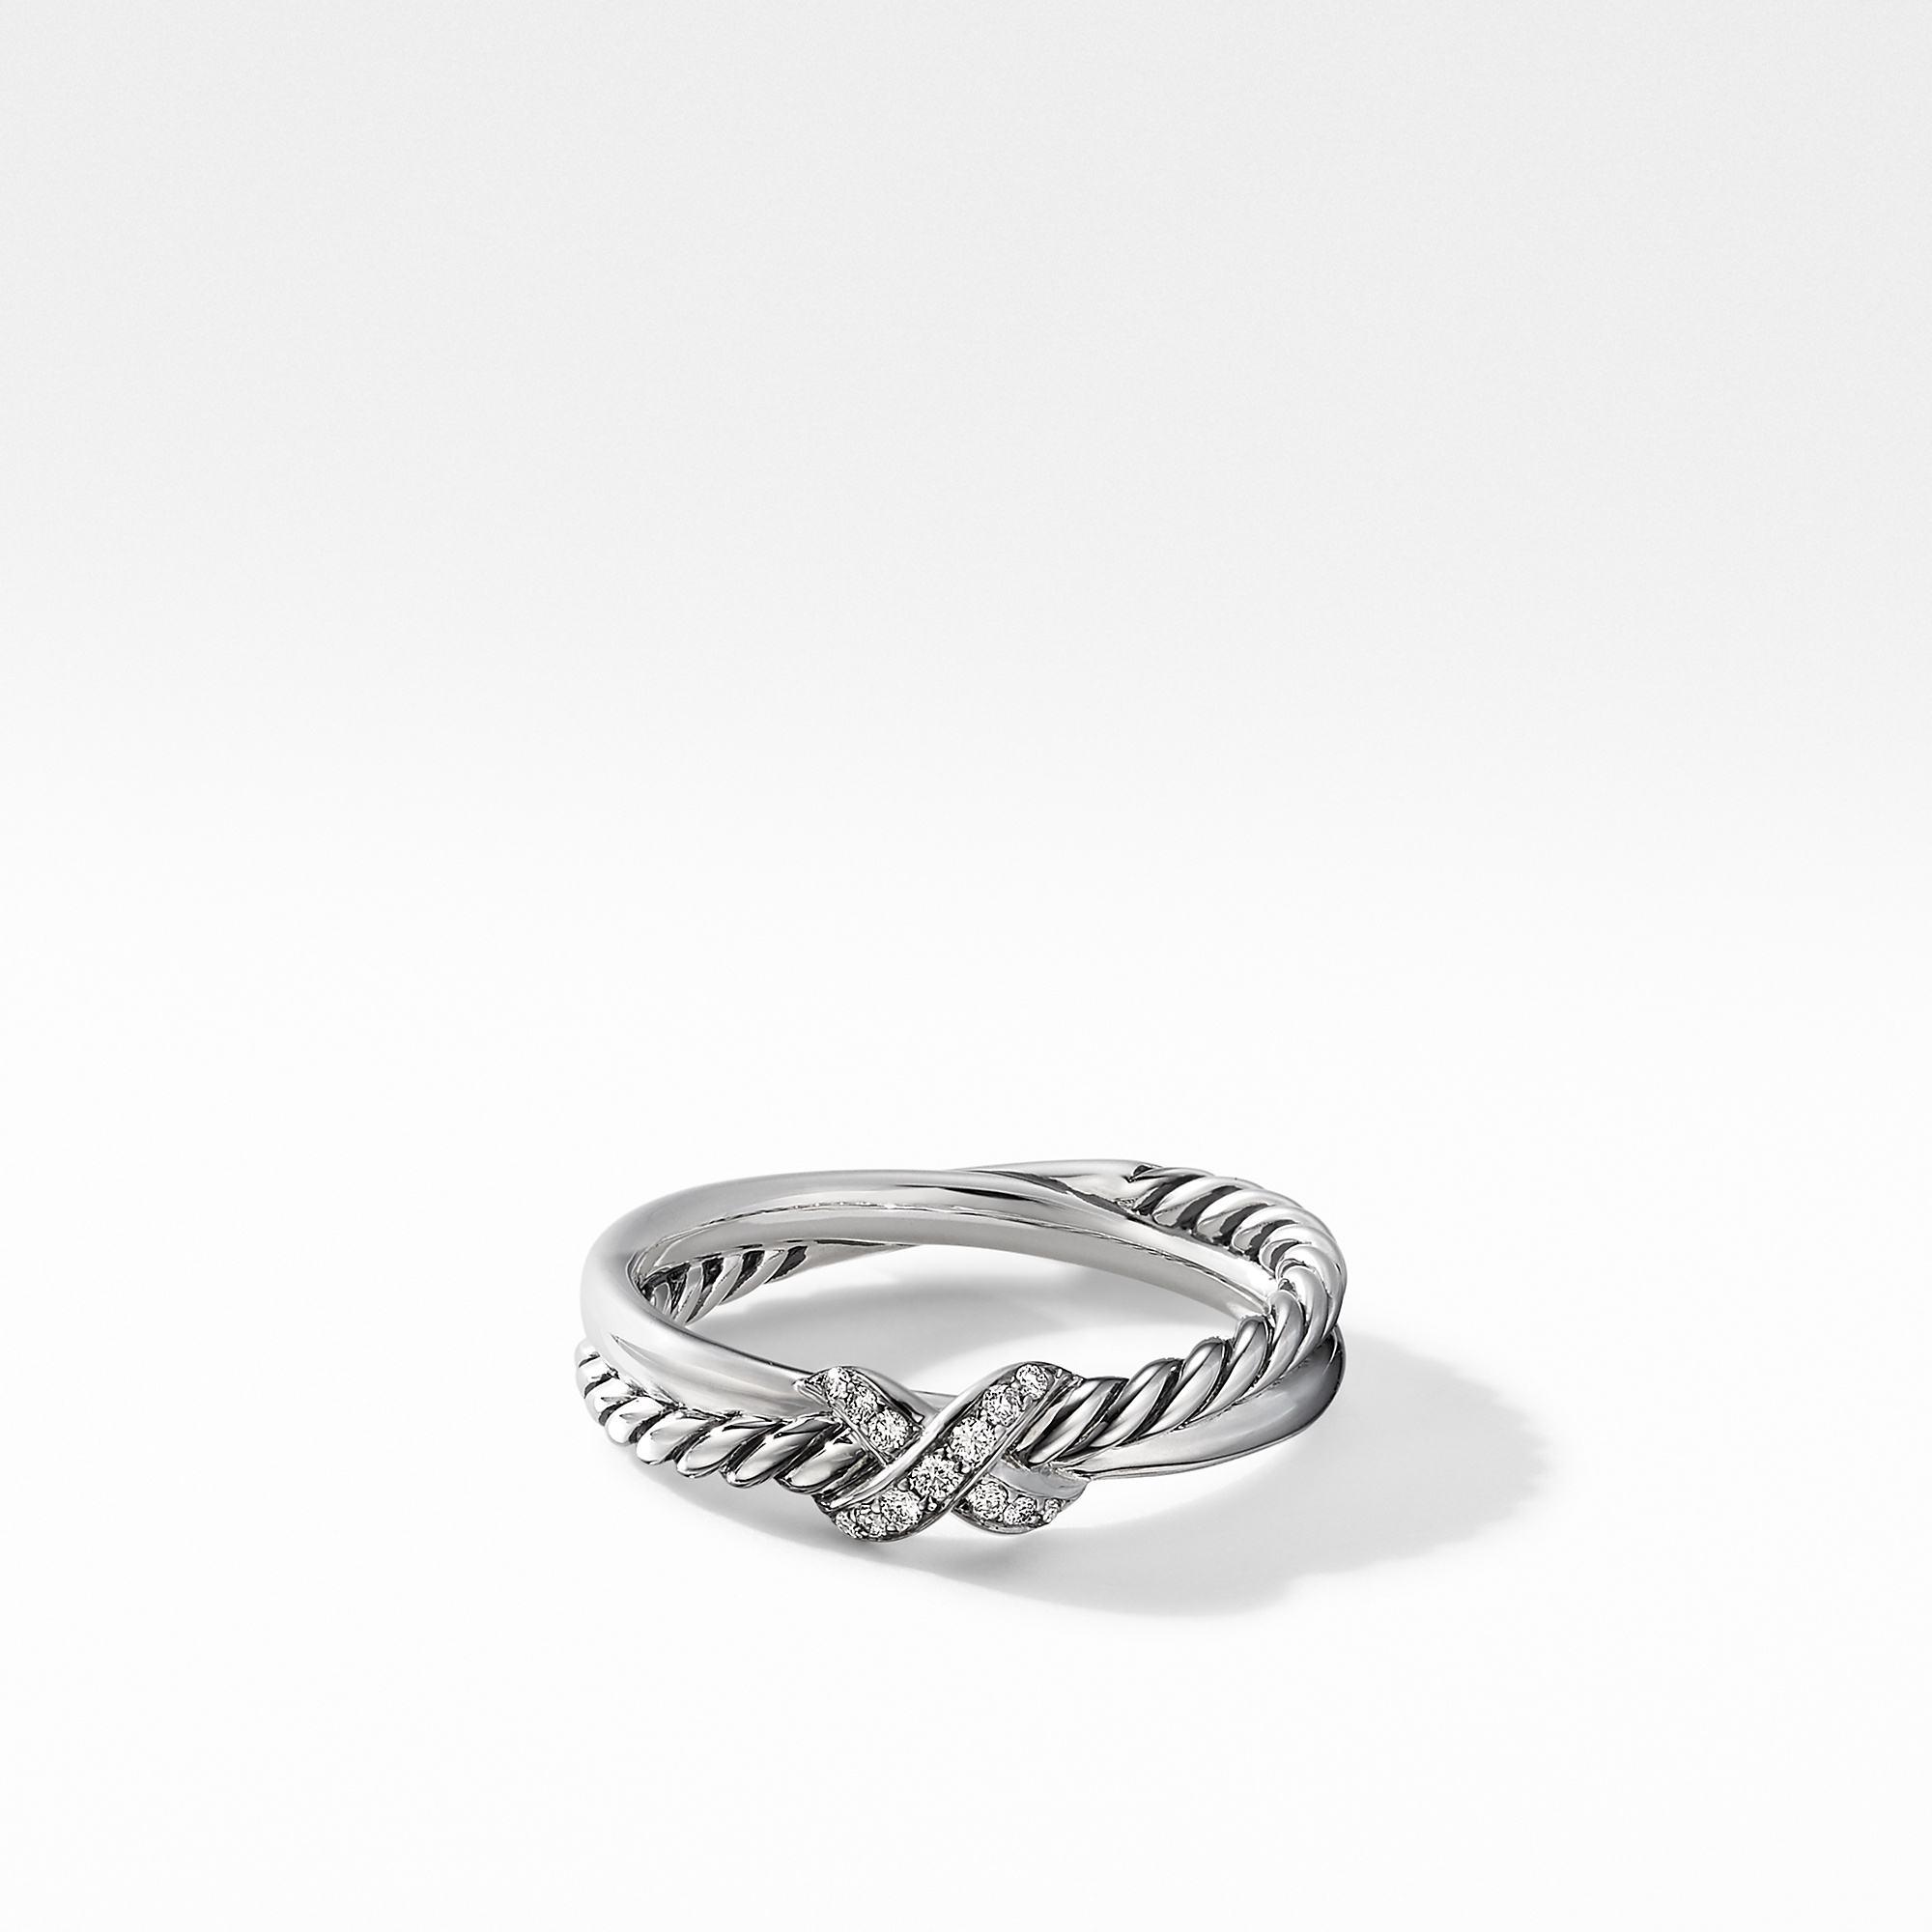 David Yurman Petite X Crossover Ring in Sterling Silver with Pave Diamonds, size 7